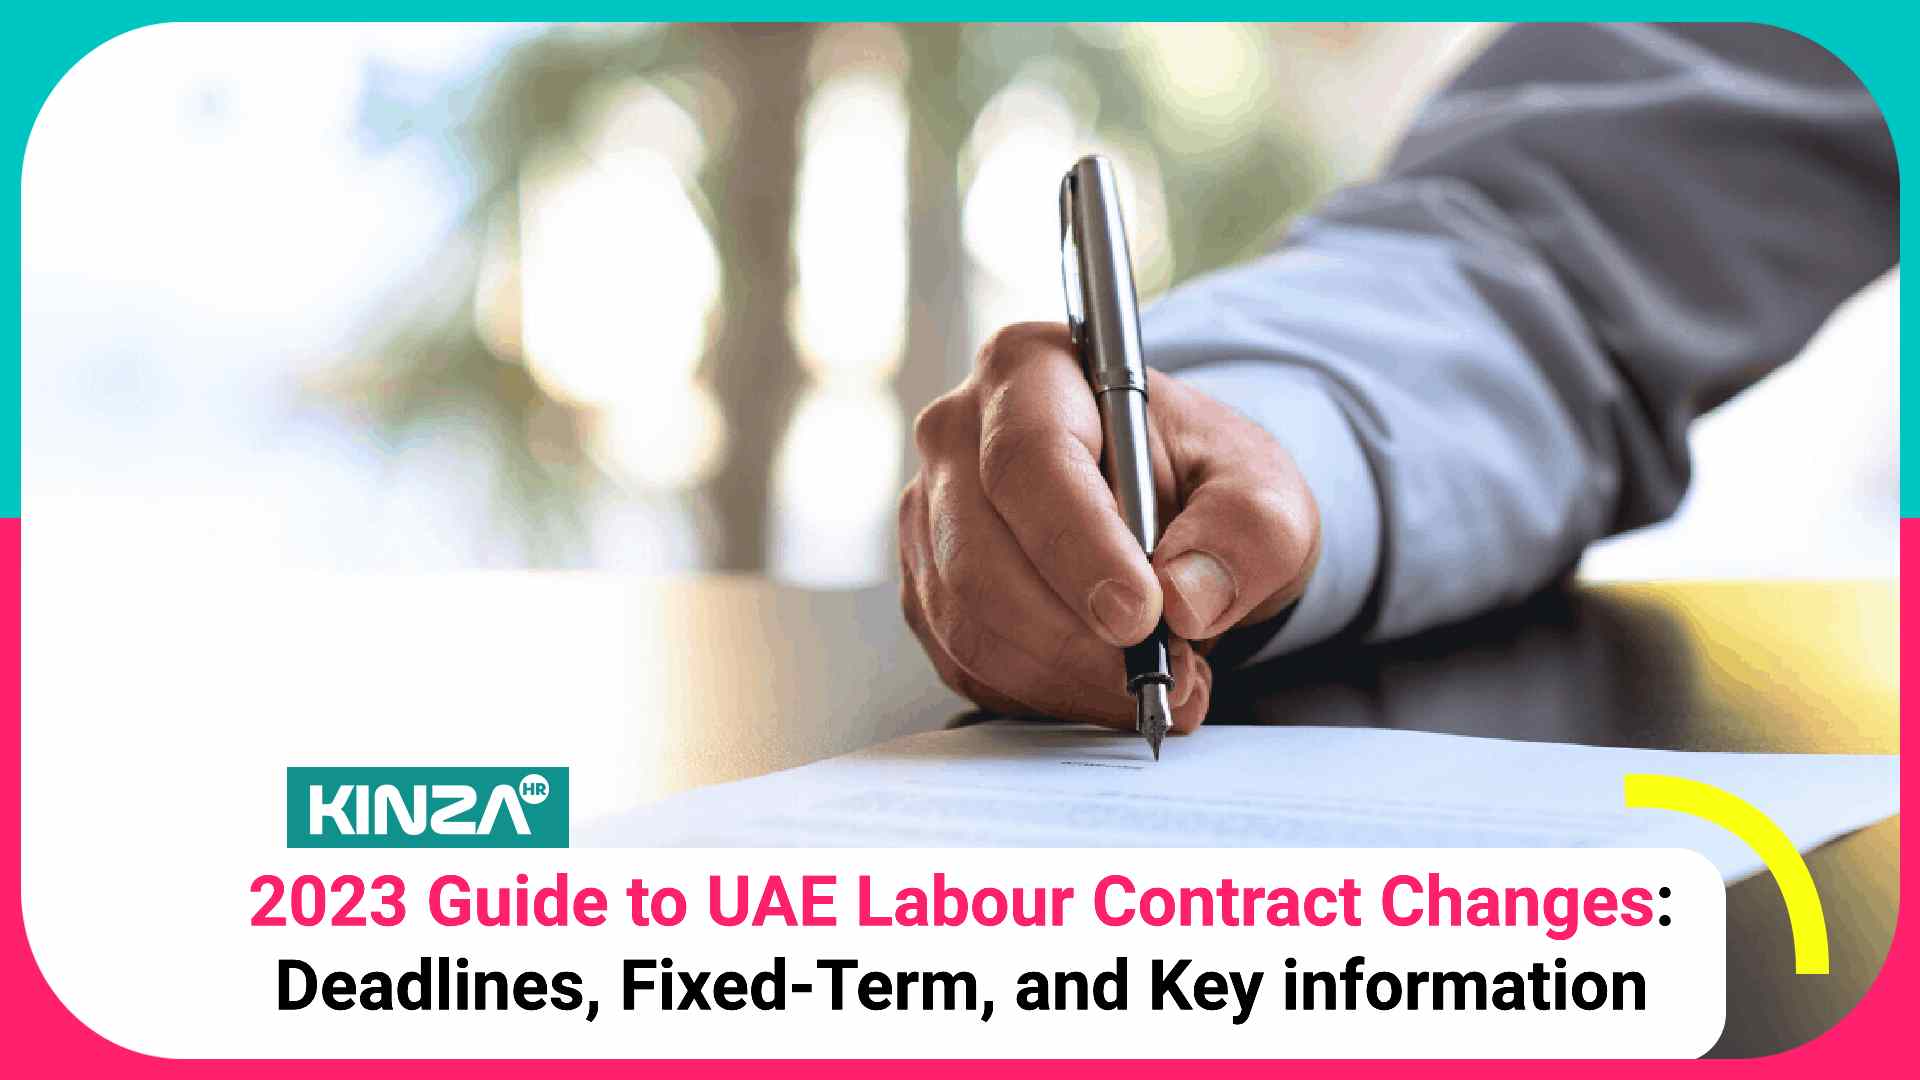 2023 Guide to UAE Labour Contract Changes: Deadlines, Fixed-Term, and Key information